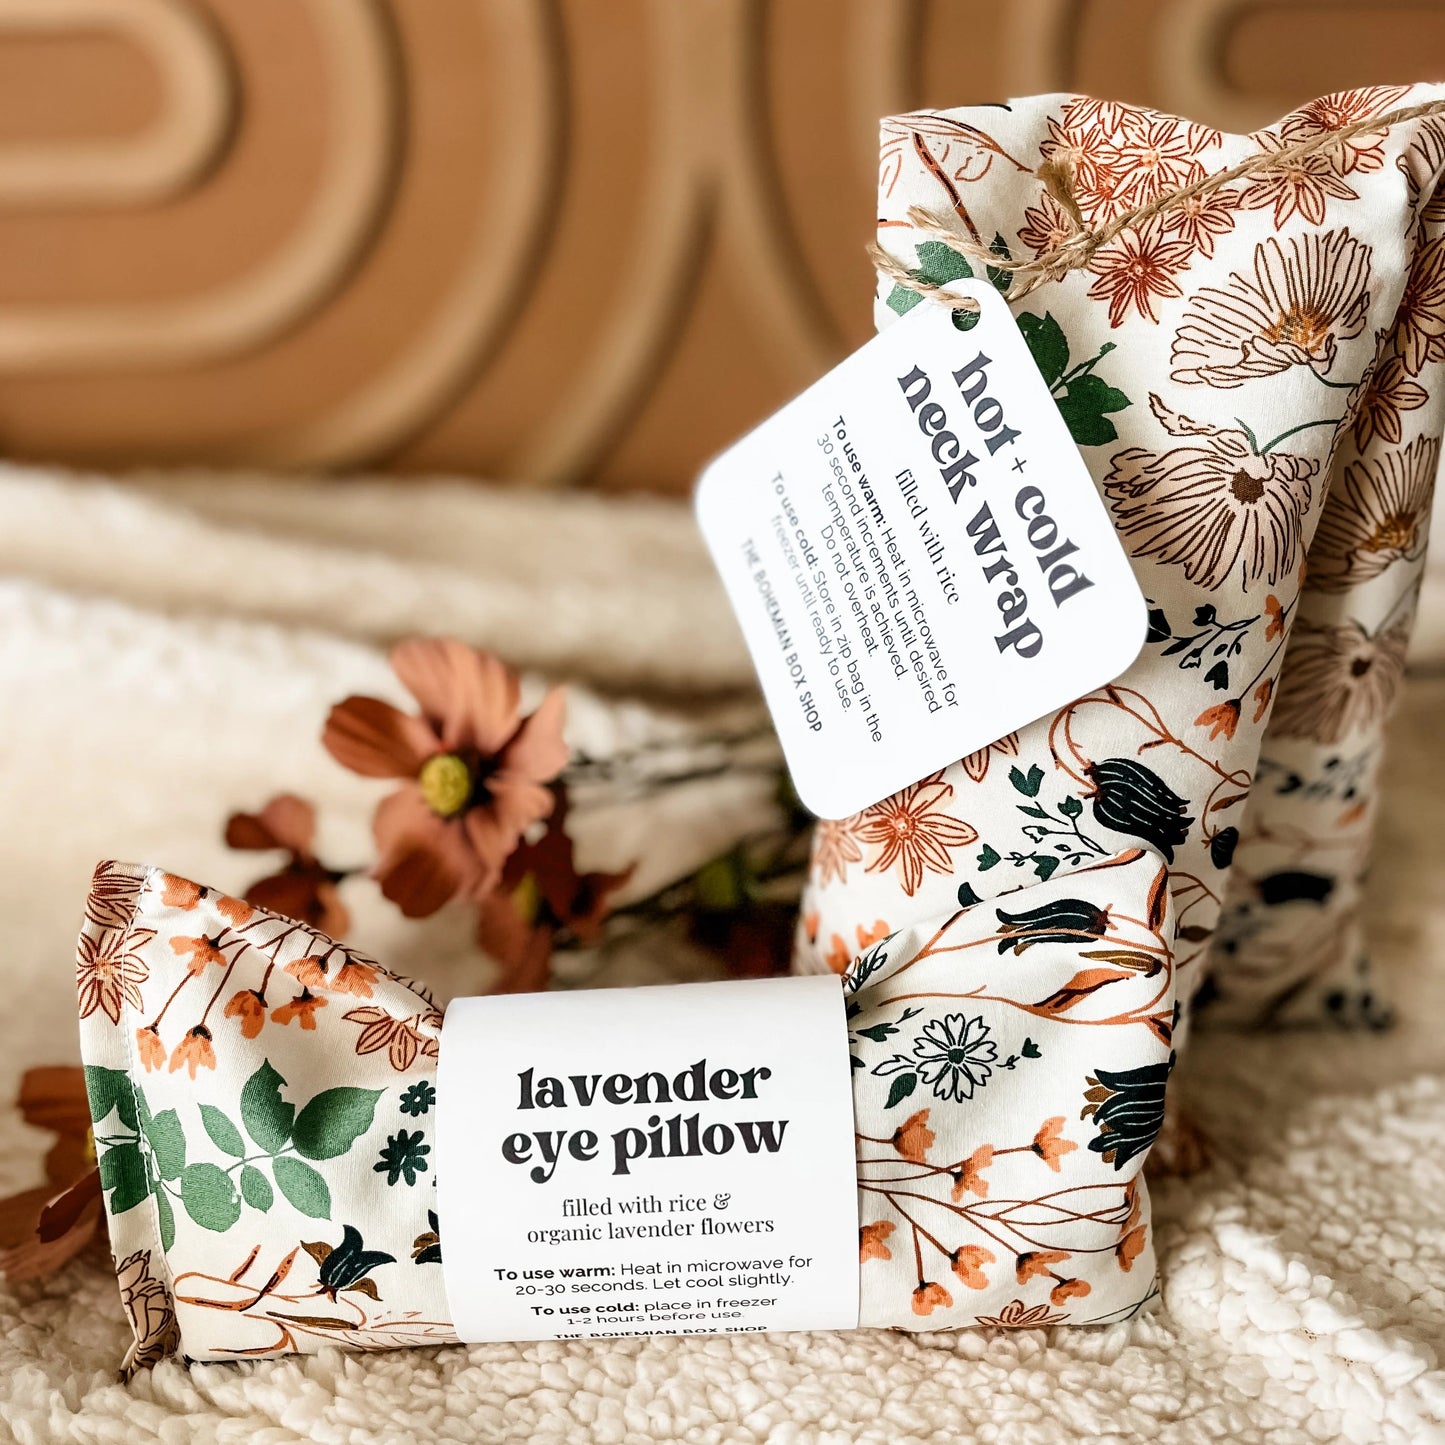 Boho Lavender Eye Pillow - Hot and Cold Neck Wrap - Microwaveable Rice Packs